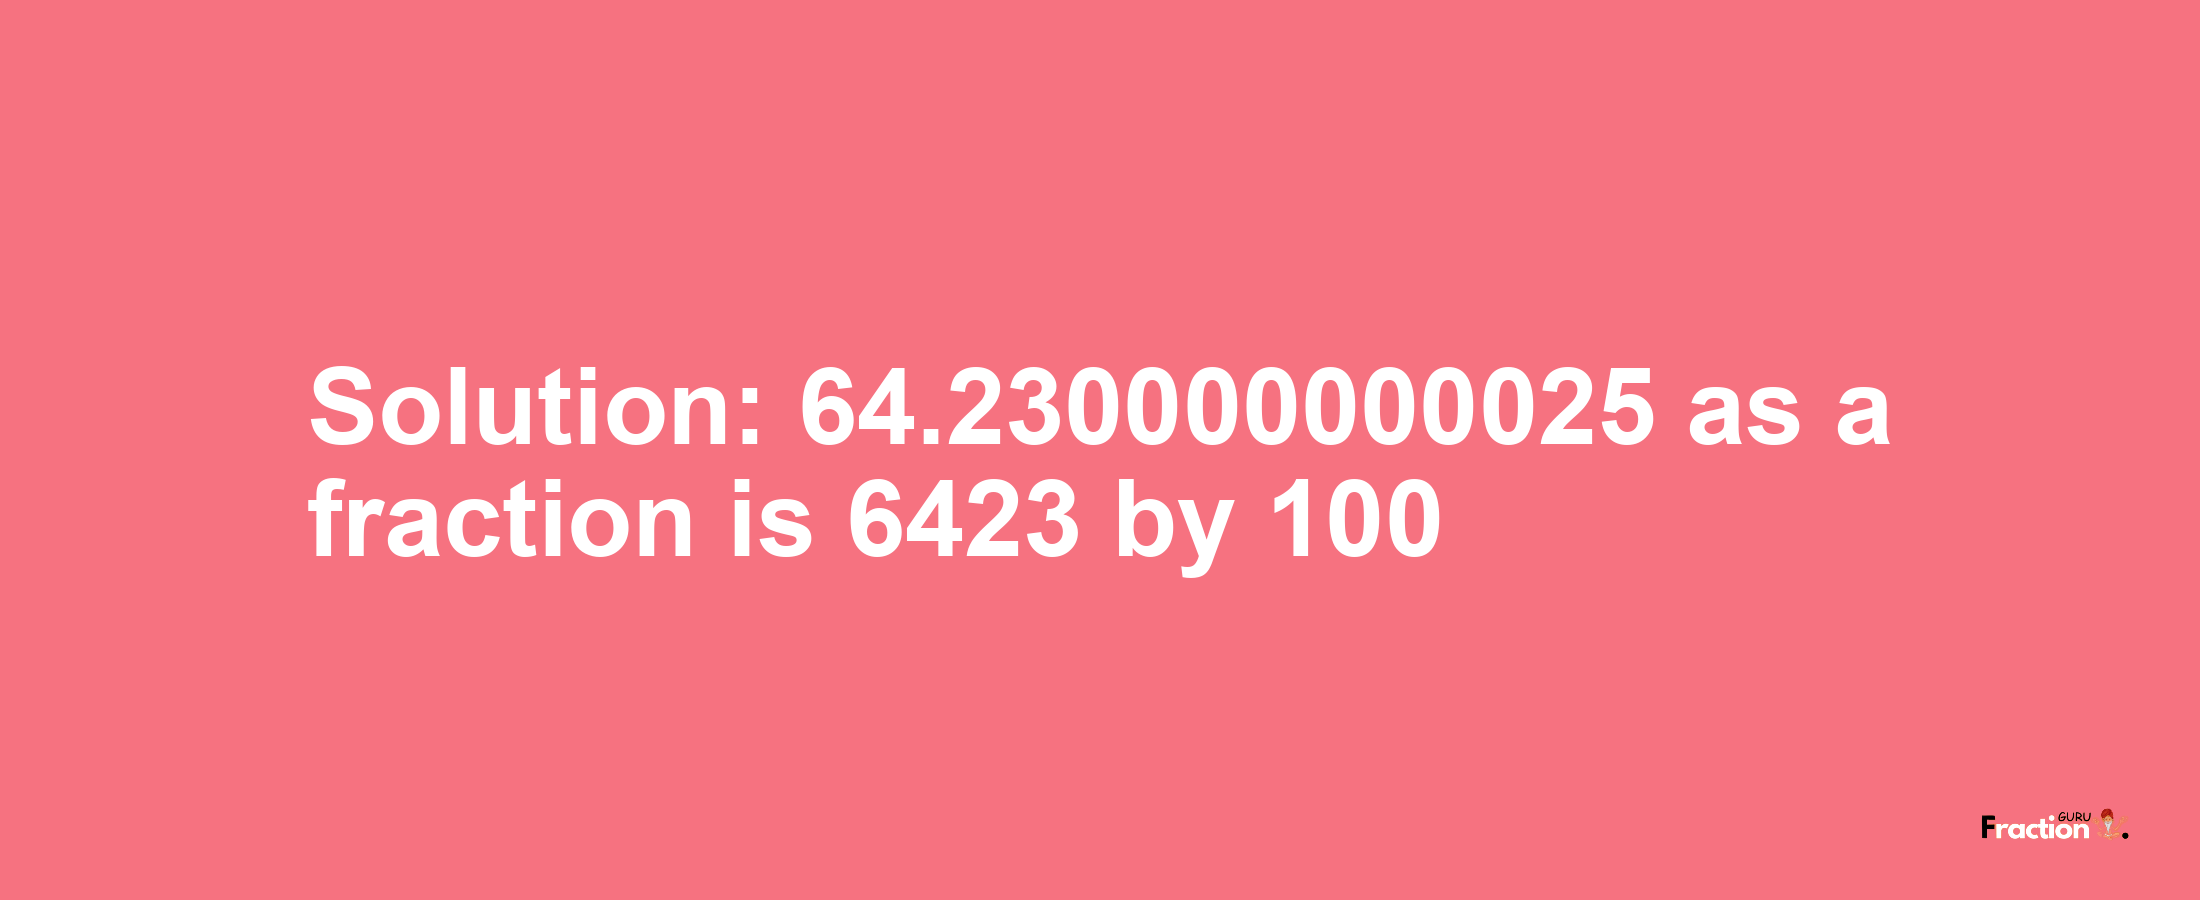 Solution:64.230000000025 as a fraction is 6423/100